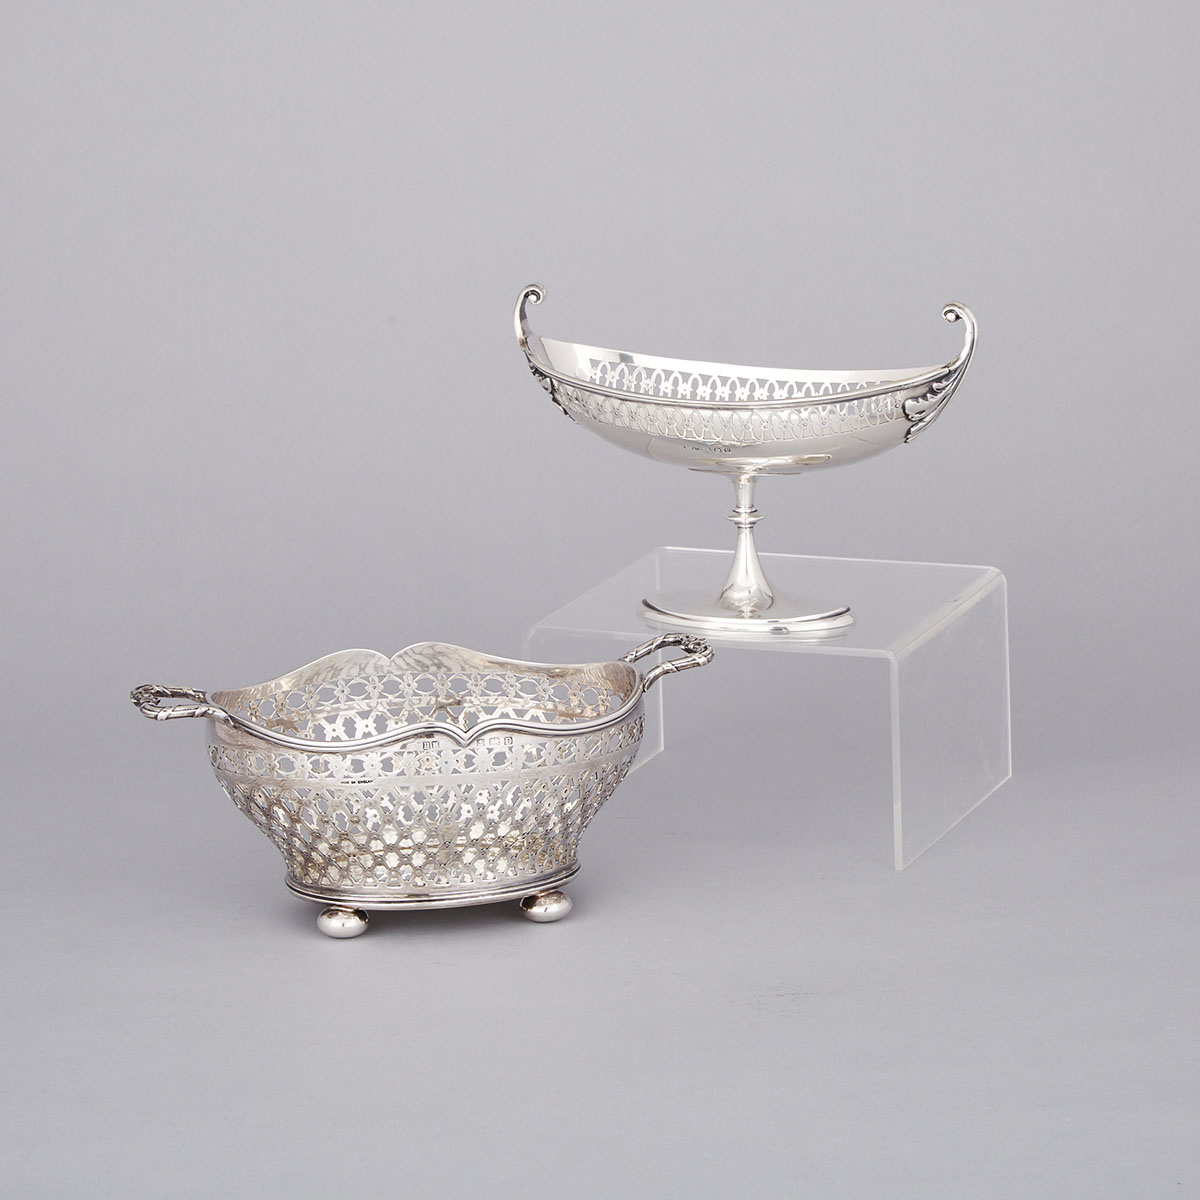 English Silver Pedestal-Footed Small Comport and Pierced Two-Handled Oval Basket, Henry Matthews, Birmingham, 1920 and 1928 